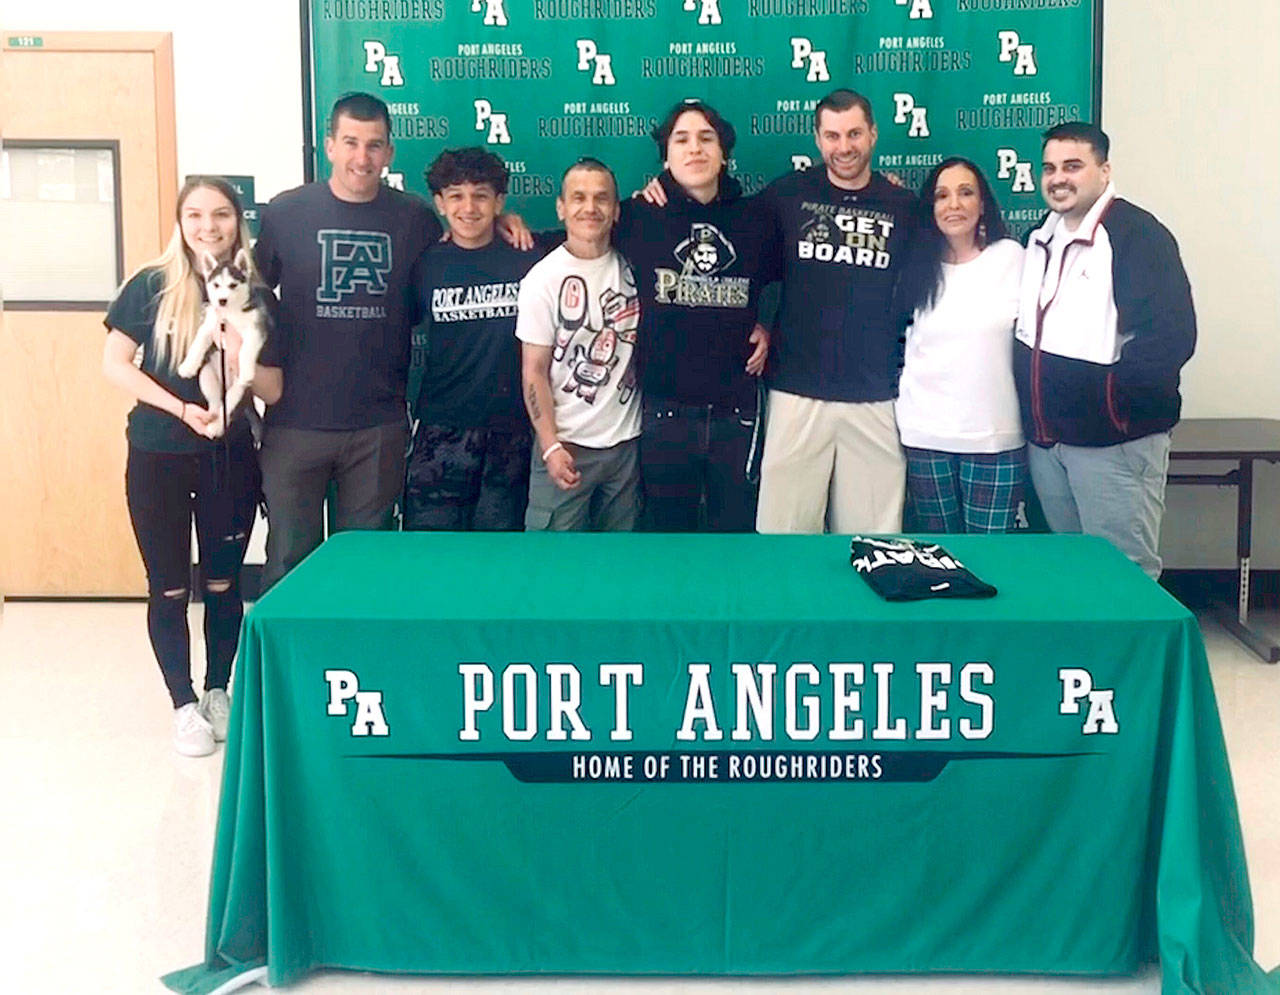 Port Angeles Roughrider Gary Johnson III signed last week to play basketball for Peninsula College. At his signing, from left are Cedar Johnson, Port Angeles head coach Kasey Ulin, Kason Albaugh, Gary Johnson Jr, Gary Johnson III, Peninsula College head coach Donald Rollman, Gayla Johnson and Eddie Perez.